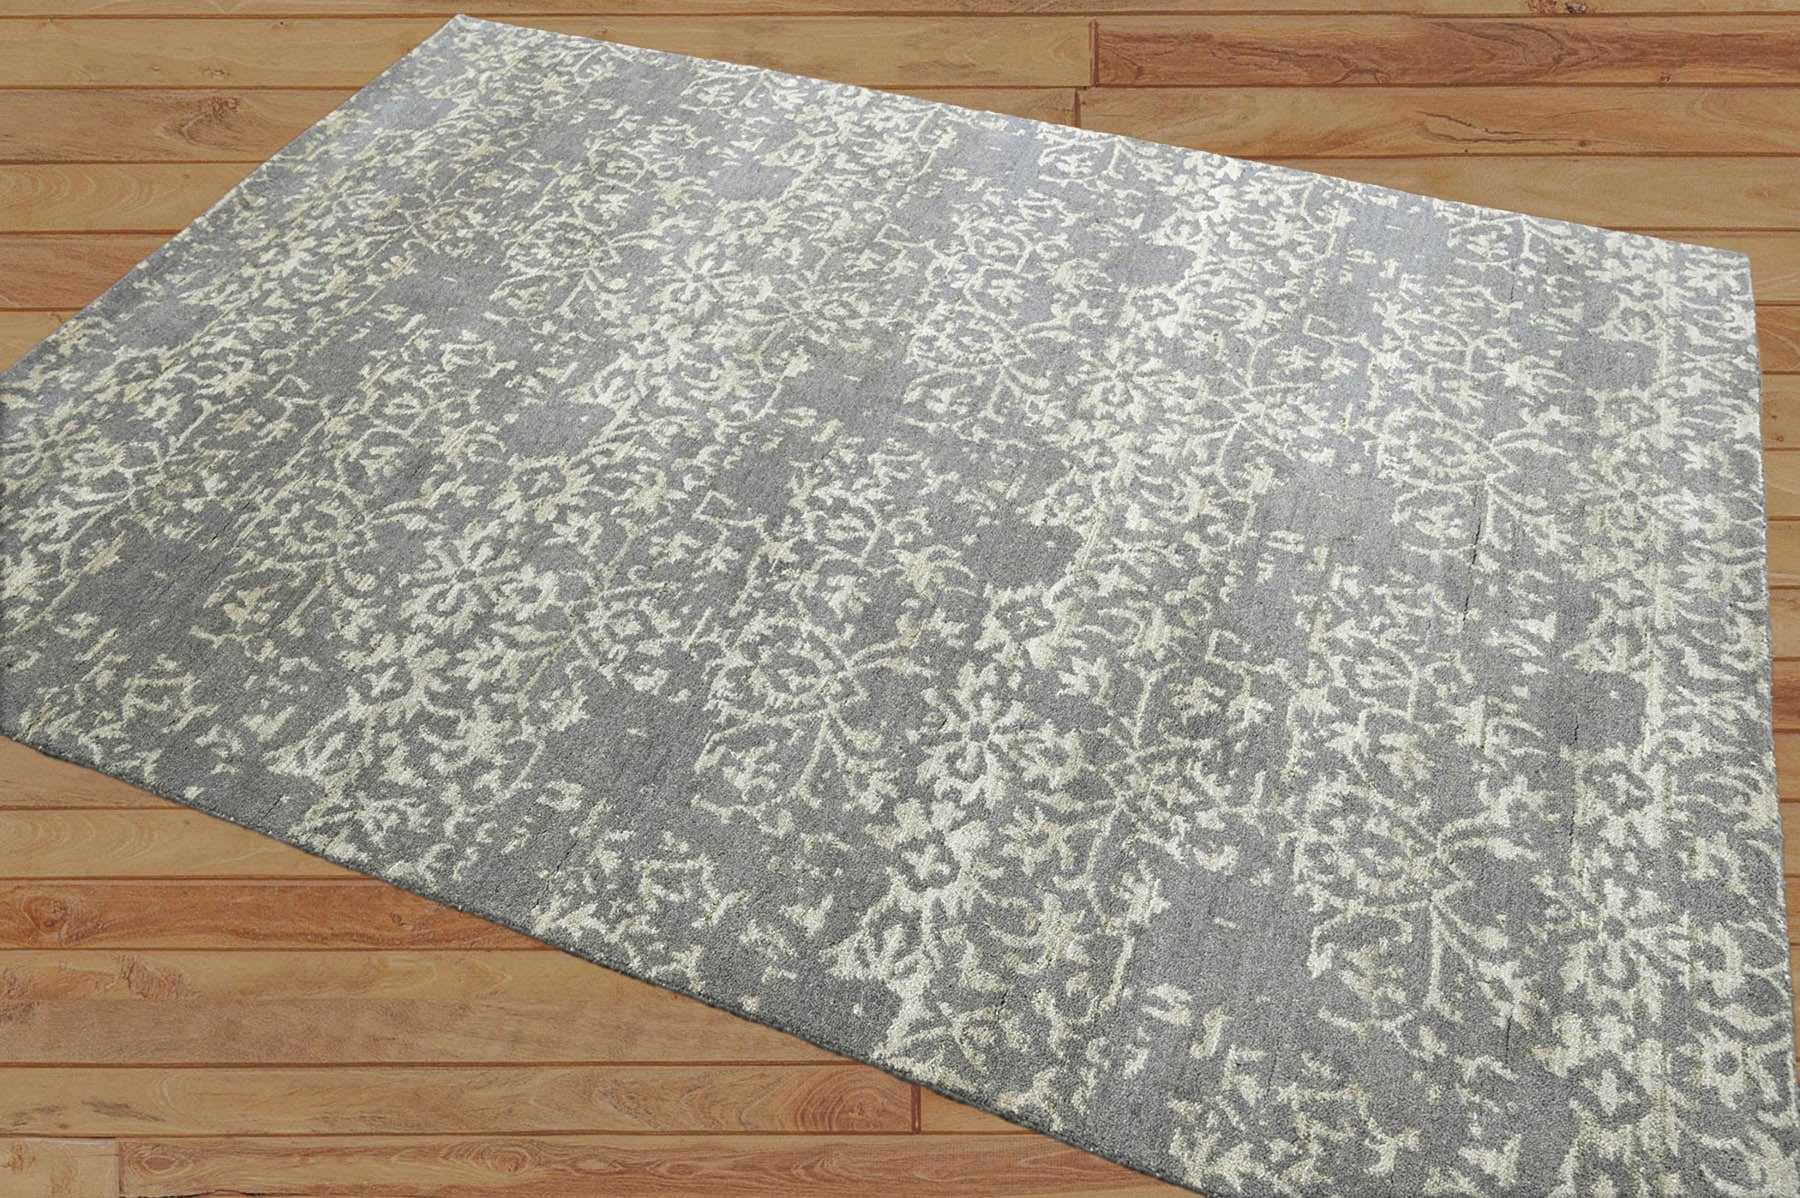 Xzavious 5x7 Gray LoomBloom Hand Knotted Transitional All-Over Tibetan 100% Wool Oriental Area Rug